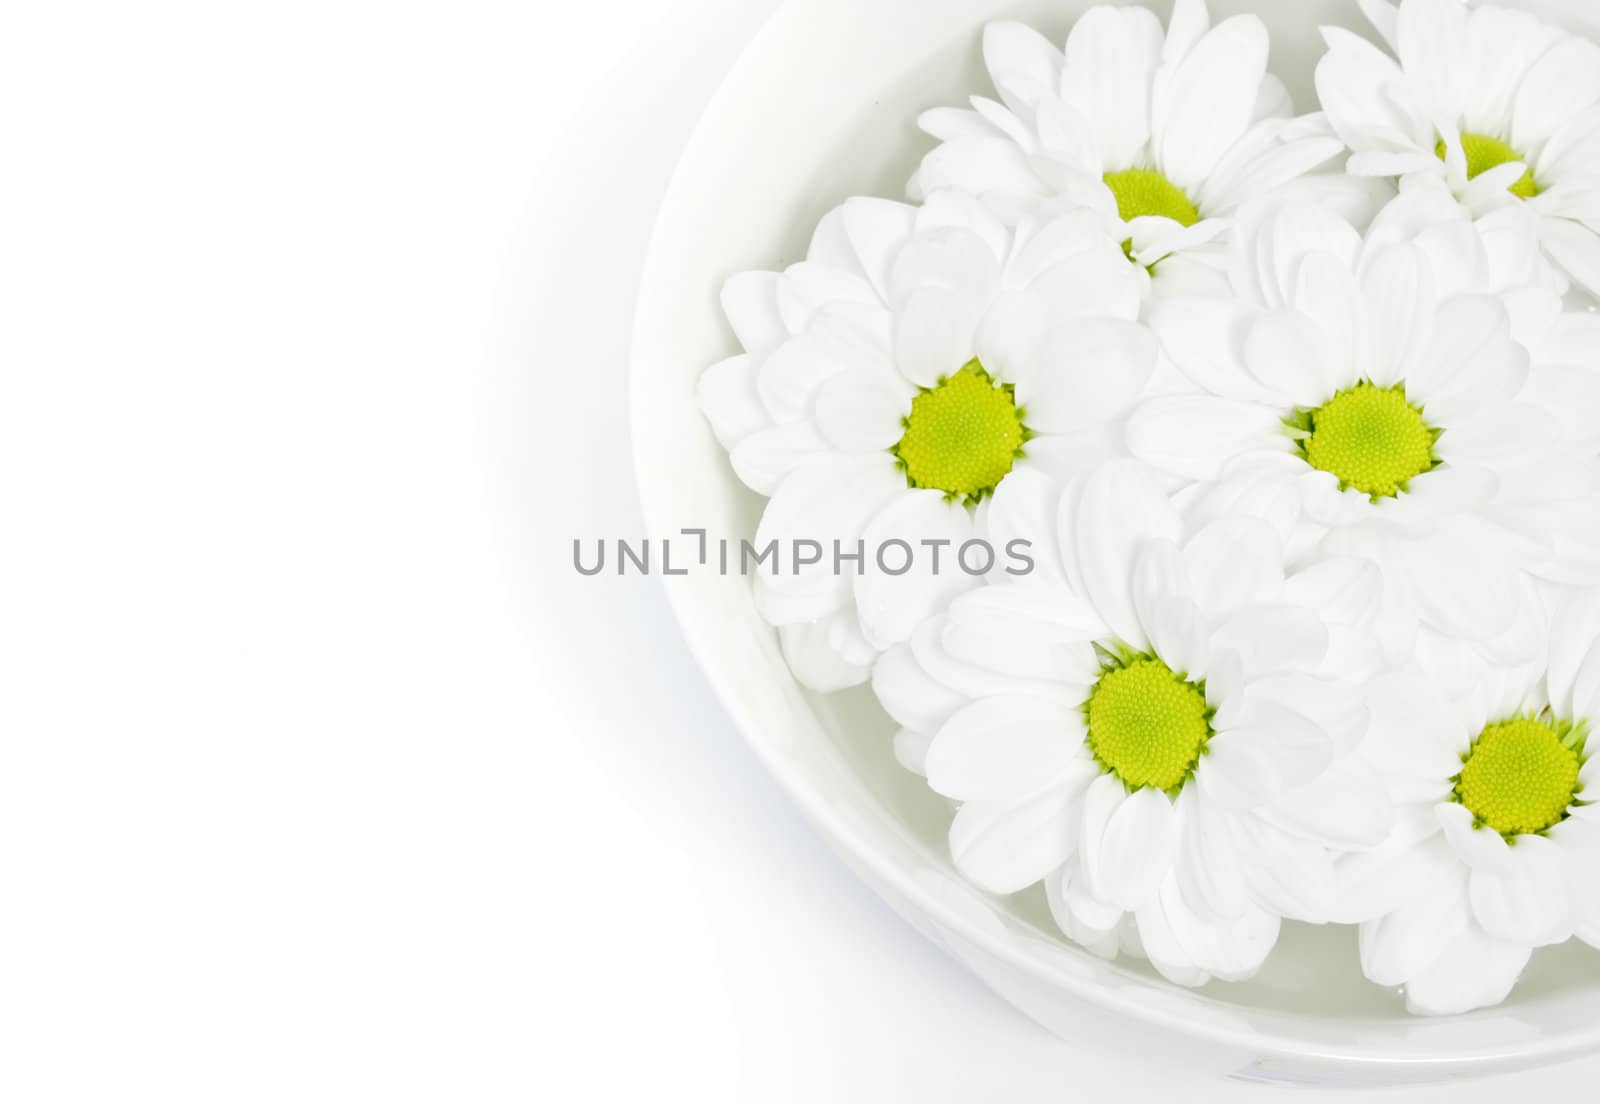 beautiful white daisies floating in a bowl of water by nubephoto